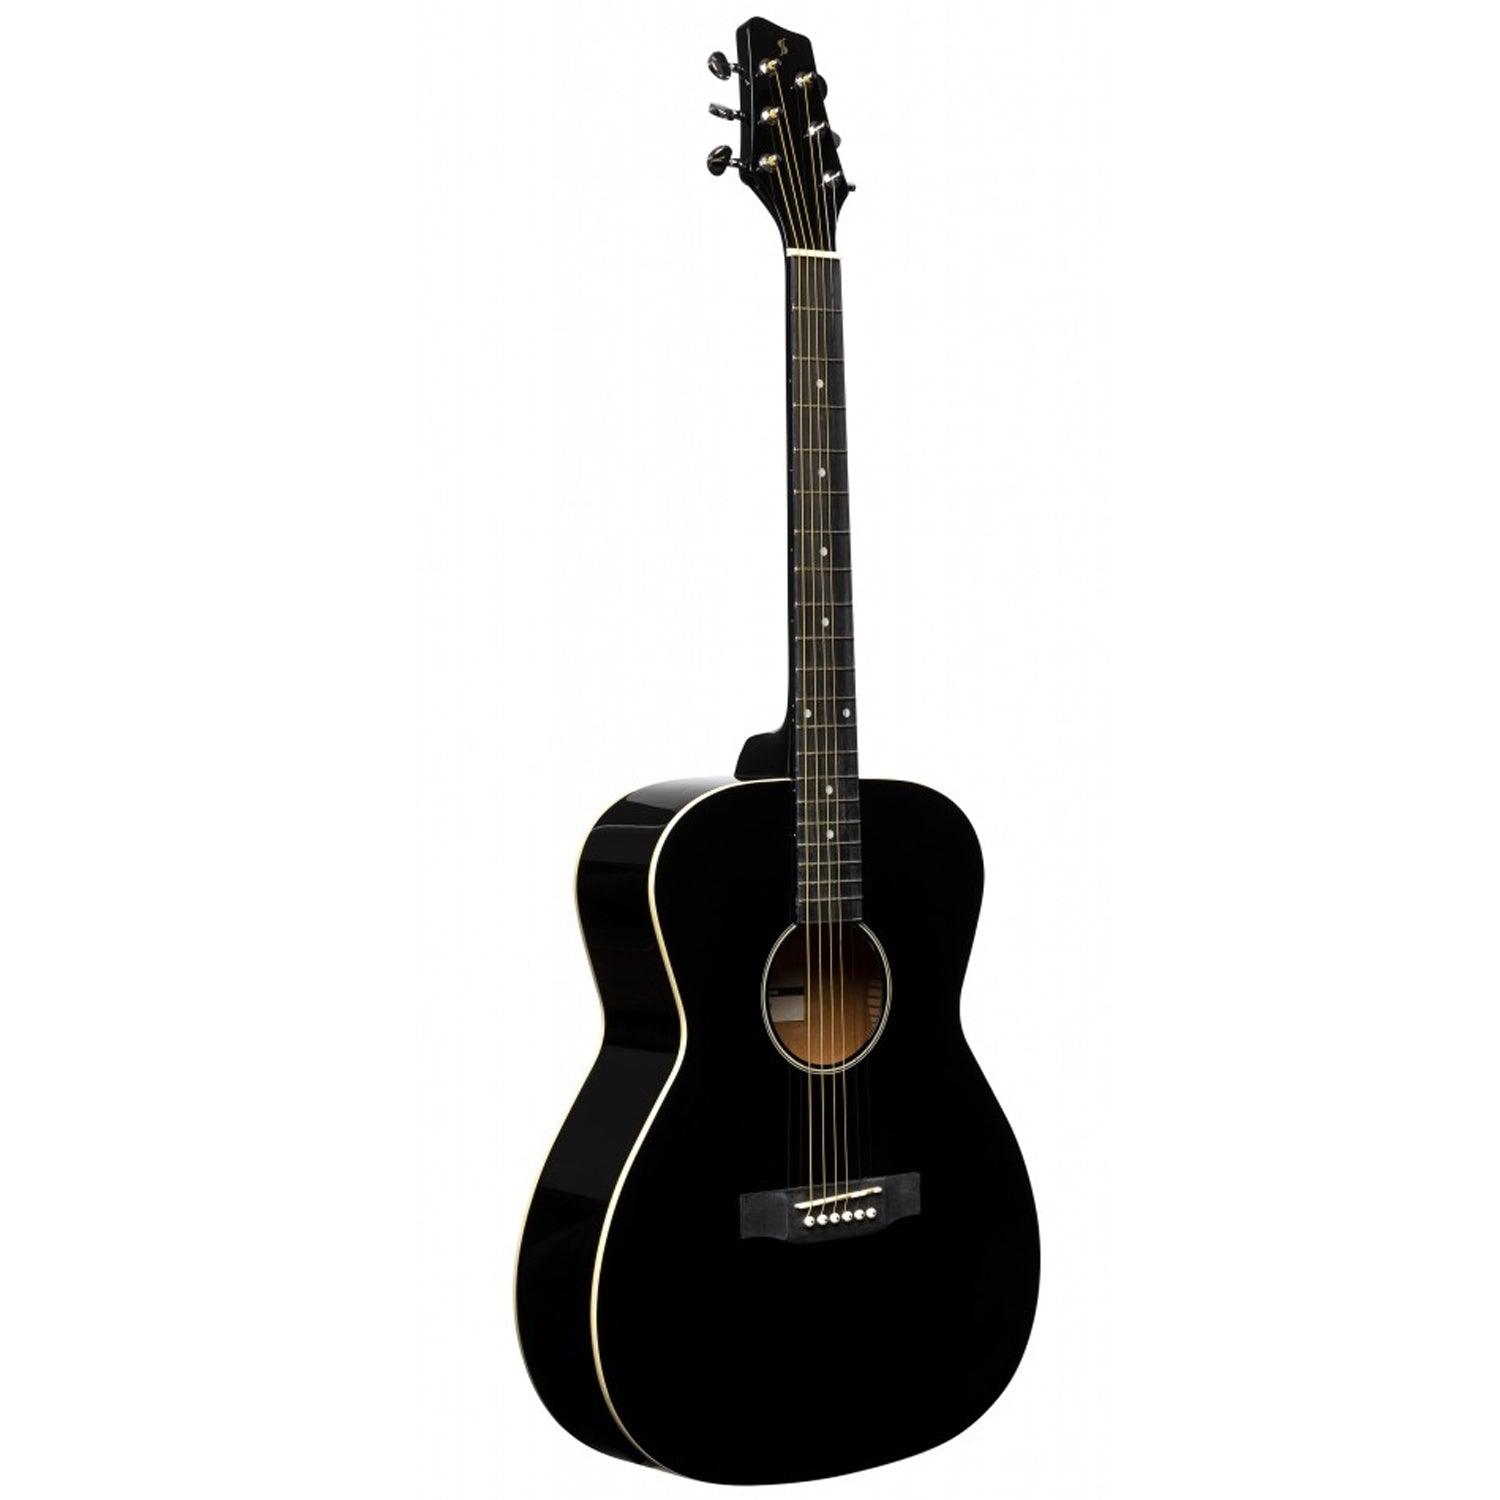 Stagg SA35 A-BK Black Auditorium Guitar with Basswood Top - DY Pro Audio